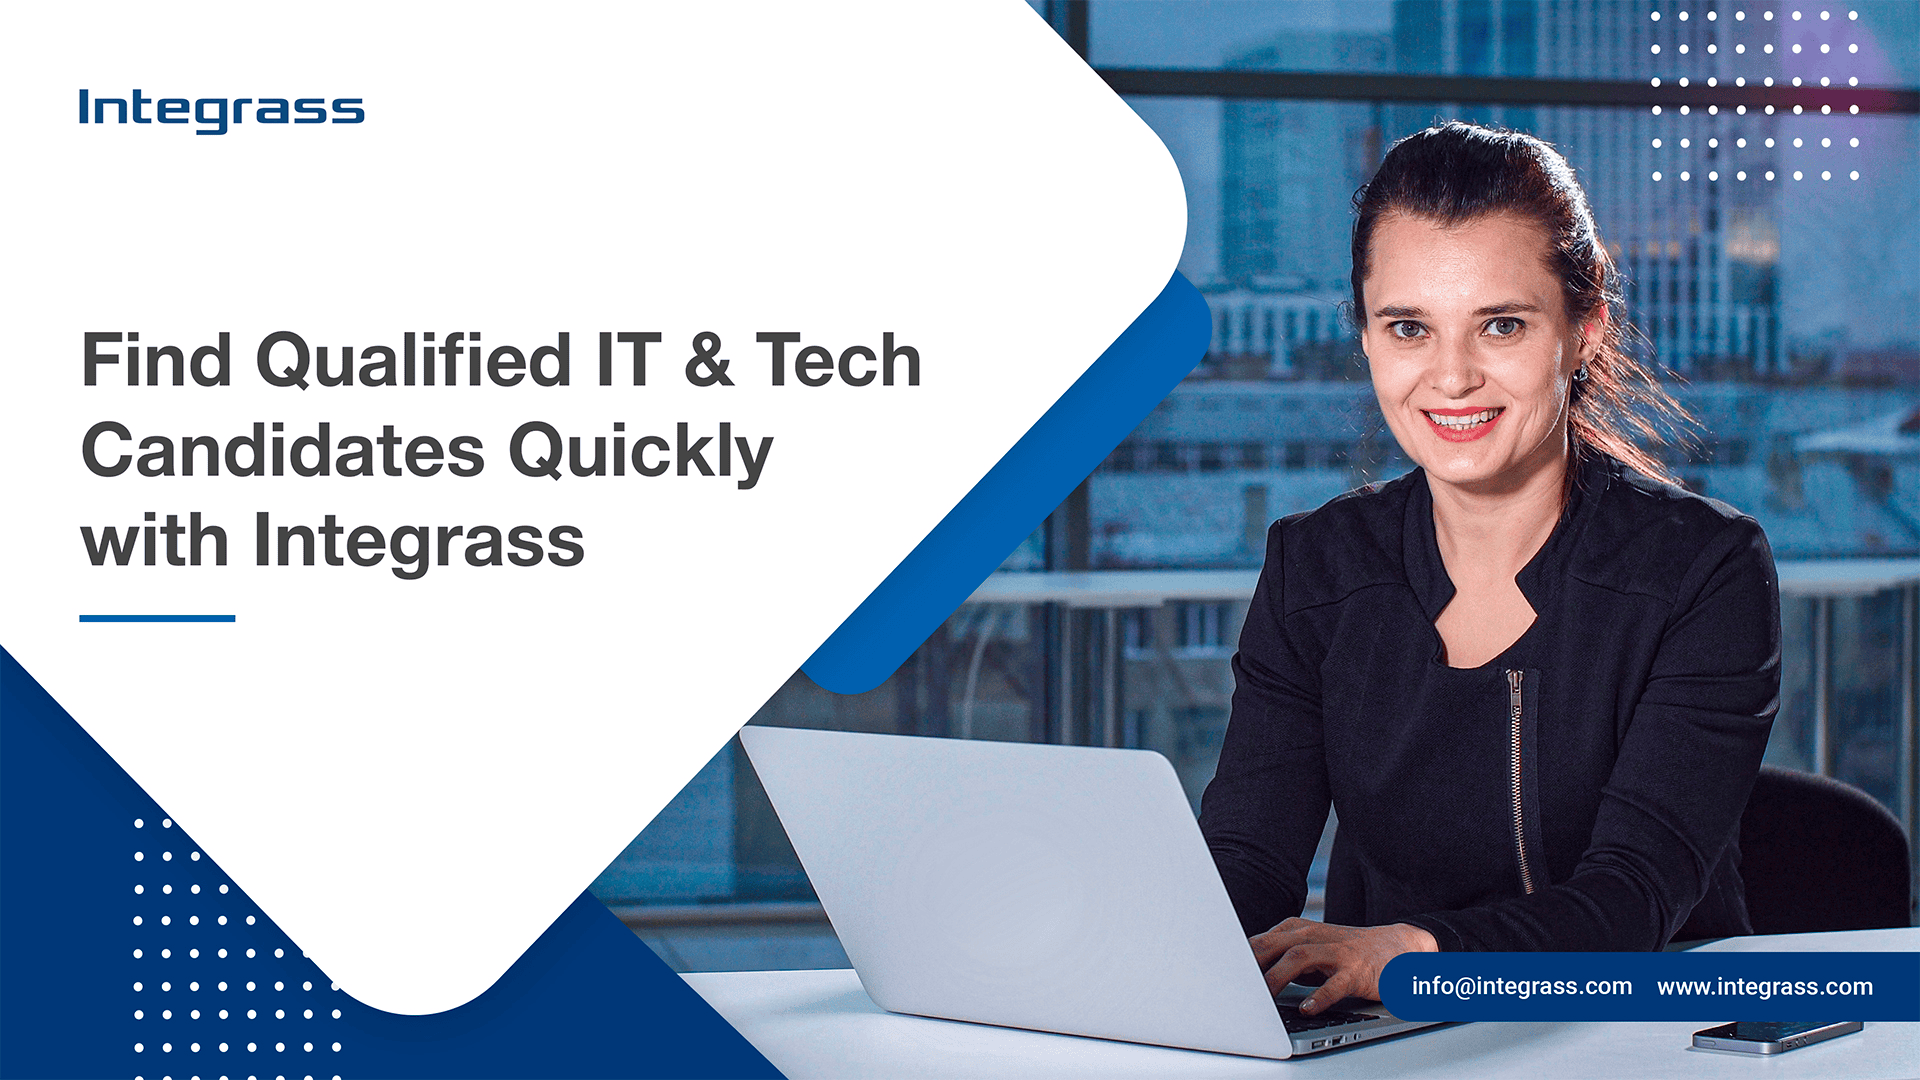 Find IT Tech Candidates Fast with Integrass - Your Solution for Qualified IT Professionals.